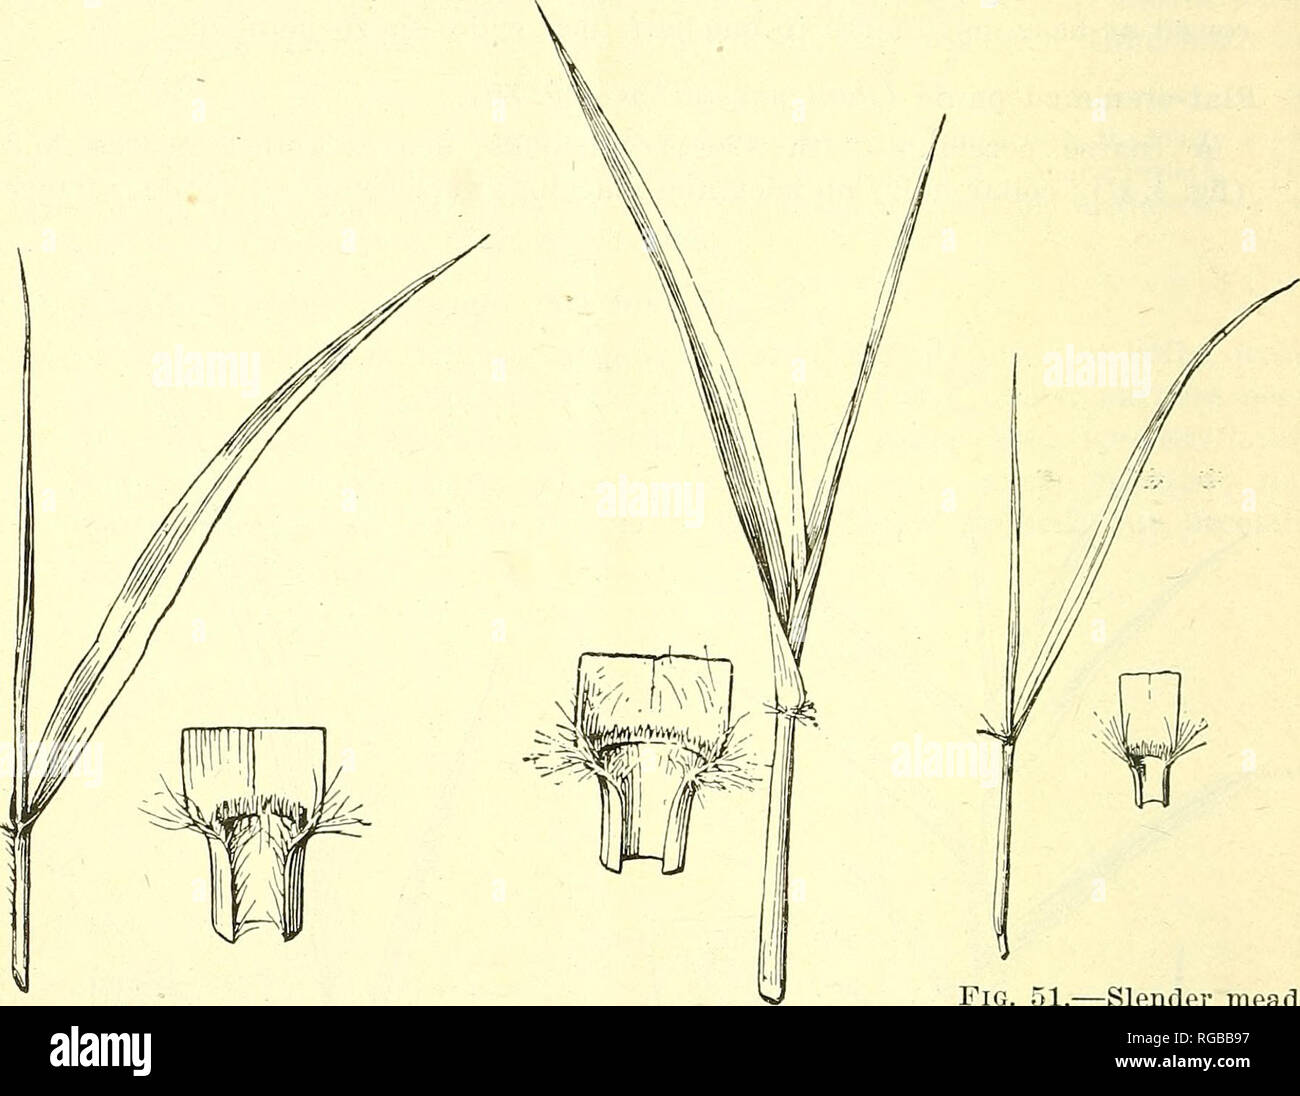 . Bulletin of the U.S. Department of Agriculture. Agriculture; Agriculture. 26 BULLETIN 461, U. S. DEPARTMENT OF AGRICULTURE. 48. Stink-grass (Eragrostis cilianensis; fig. 52). A slender, tufted, often decumbent annual; leaves rolled in the bud ; collar narrow, hairy; auricles none: ligule a fringe of hairs; sheaths glabrous,. Fig. 49.—Green foxtail (Chae- tochloa viridis.) Fig. 50. — Flat - stemmed panic (Panicum anceps). Fig. 51.—Slender mead- ow grass (Eragrostis pilosa). slightly compressed; blades flat, dull, and sparsely hairy above, glossy beneath, one-eighth inch wide. Stink-grass is v Stock Photo